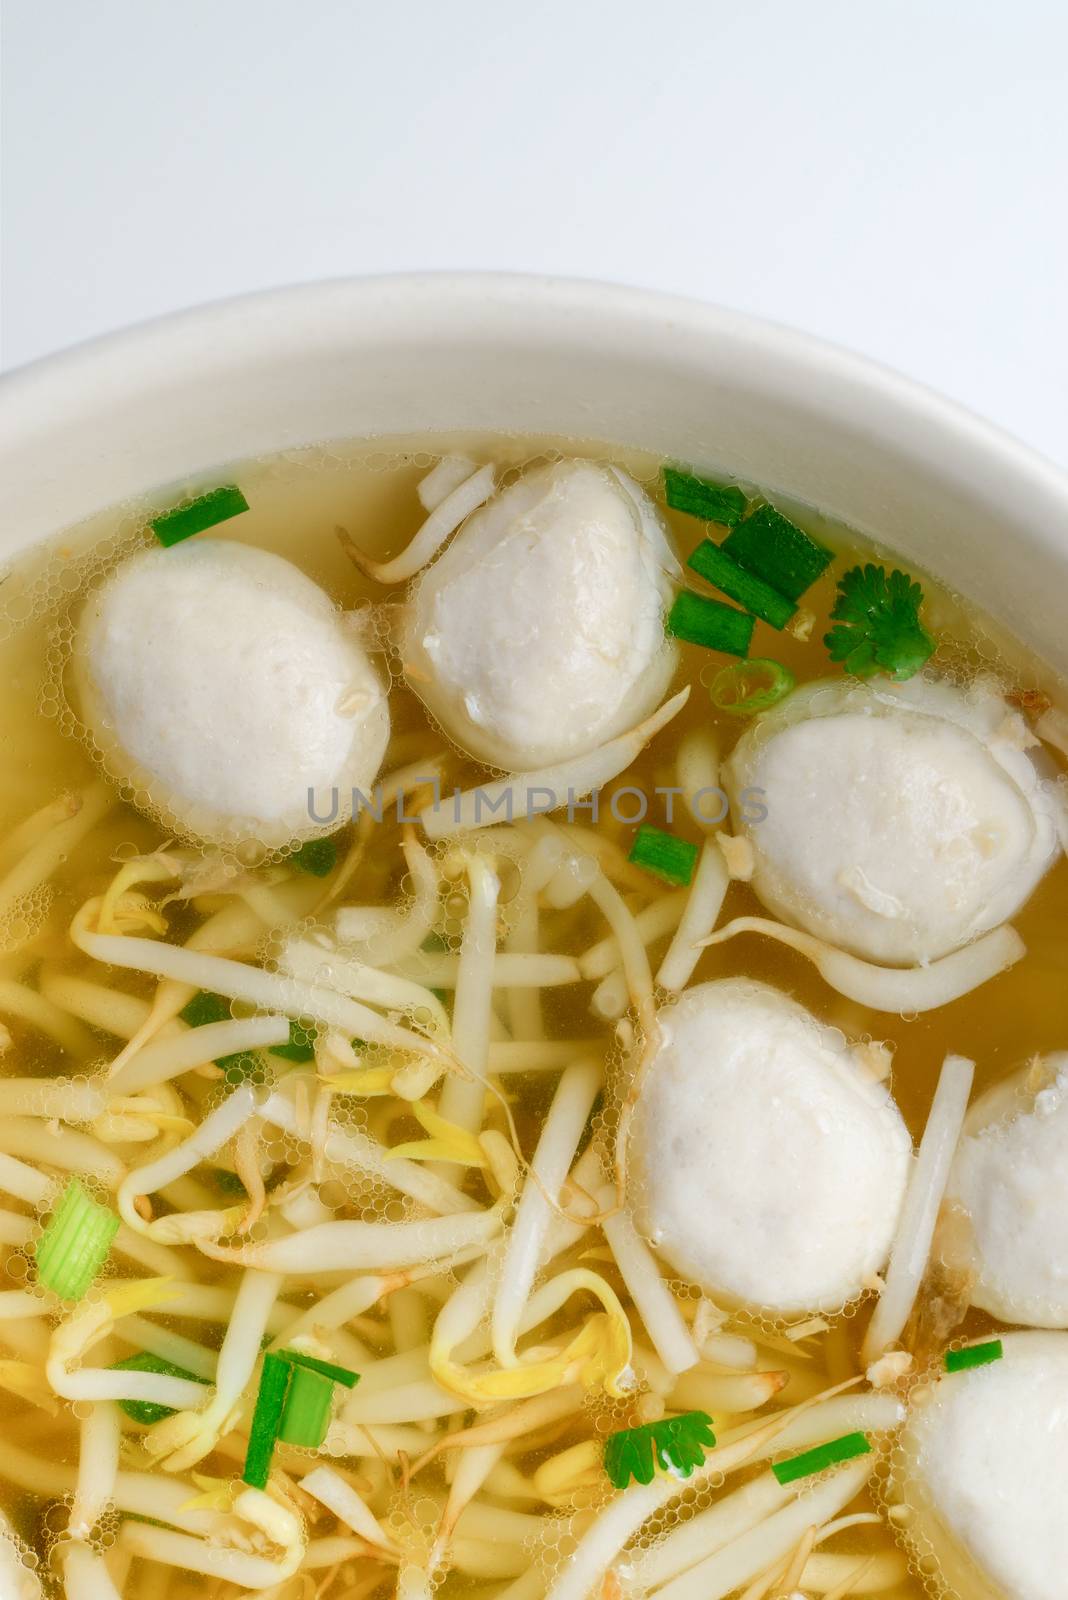 noodles soup with meat ball, bean sprouts